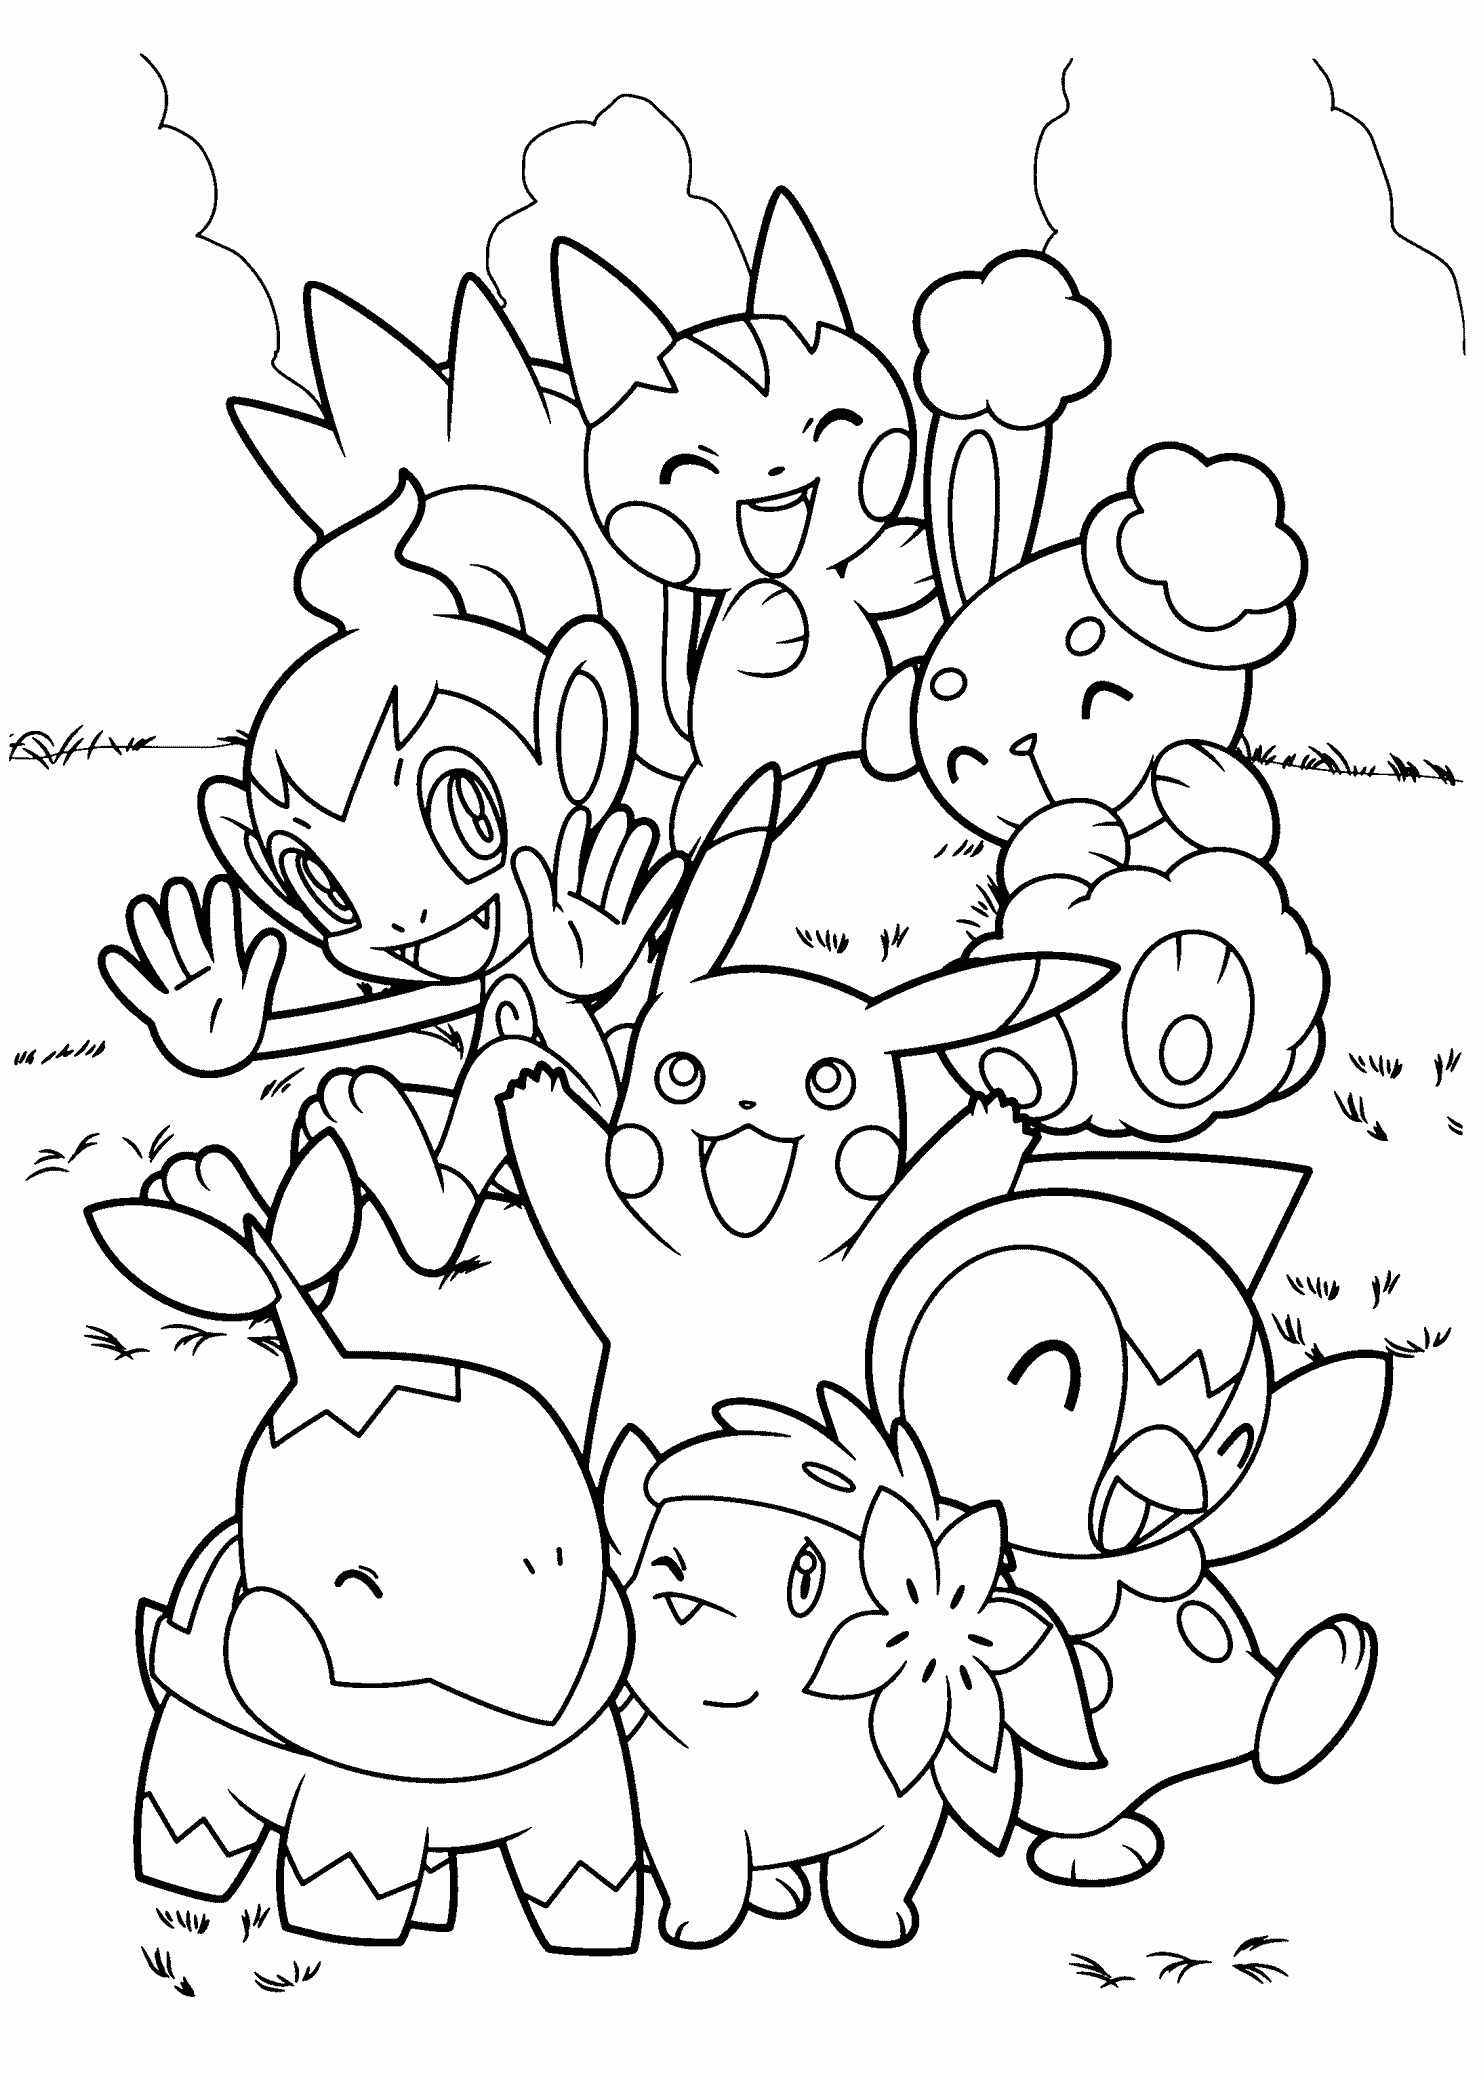 Top 75 Free Printable Pokemon Coloring Pages Online | Pinterest - Free Printable Pokemon Coloring Pages